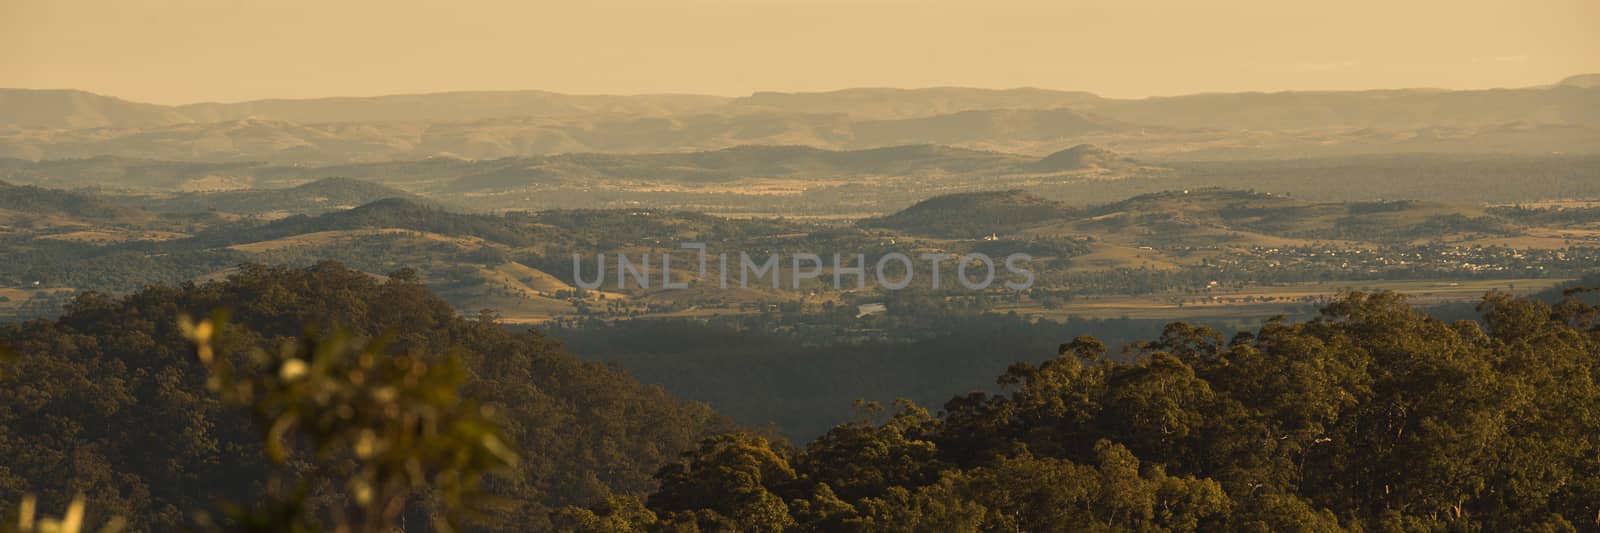 View from Mount Nebo during the afternoon near Brisbane, Queensland.